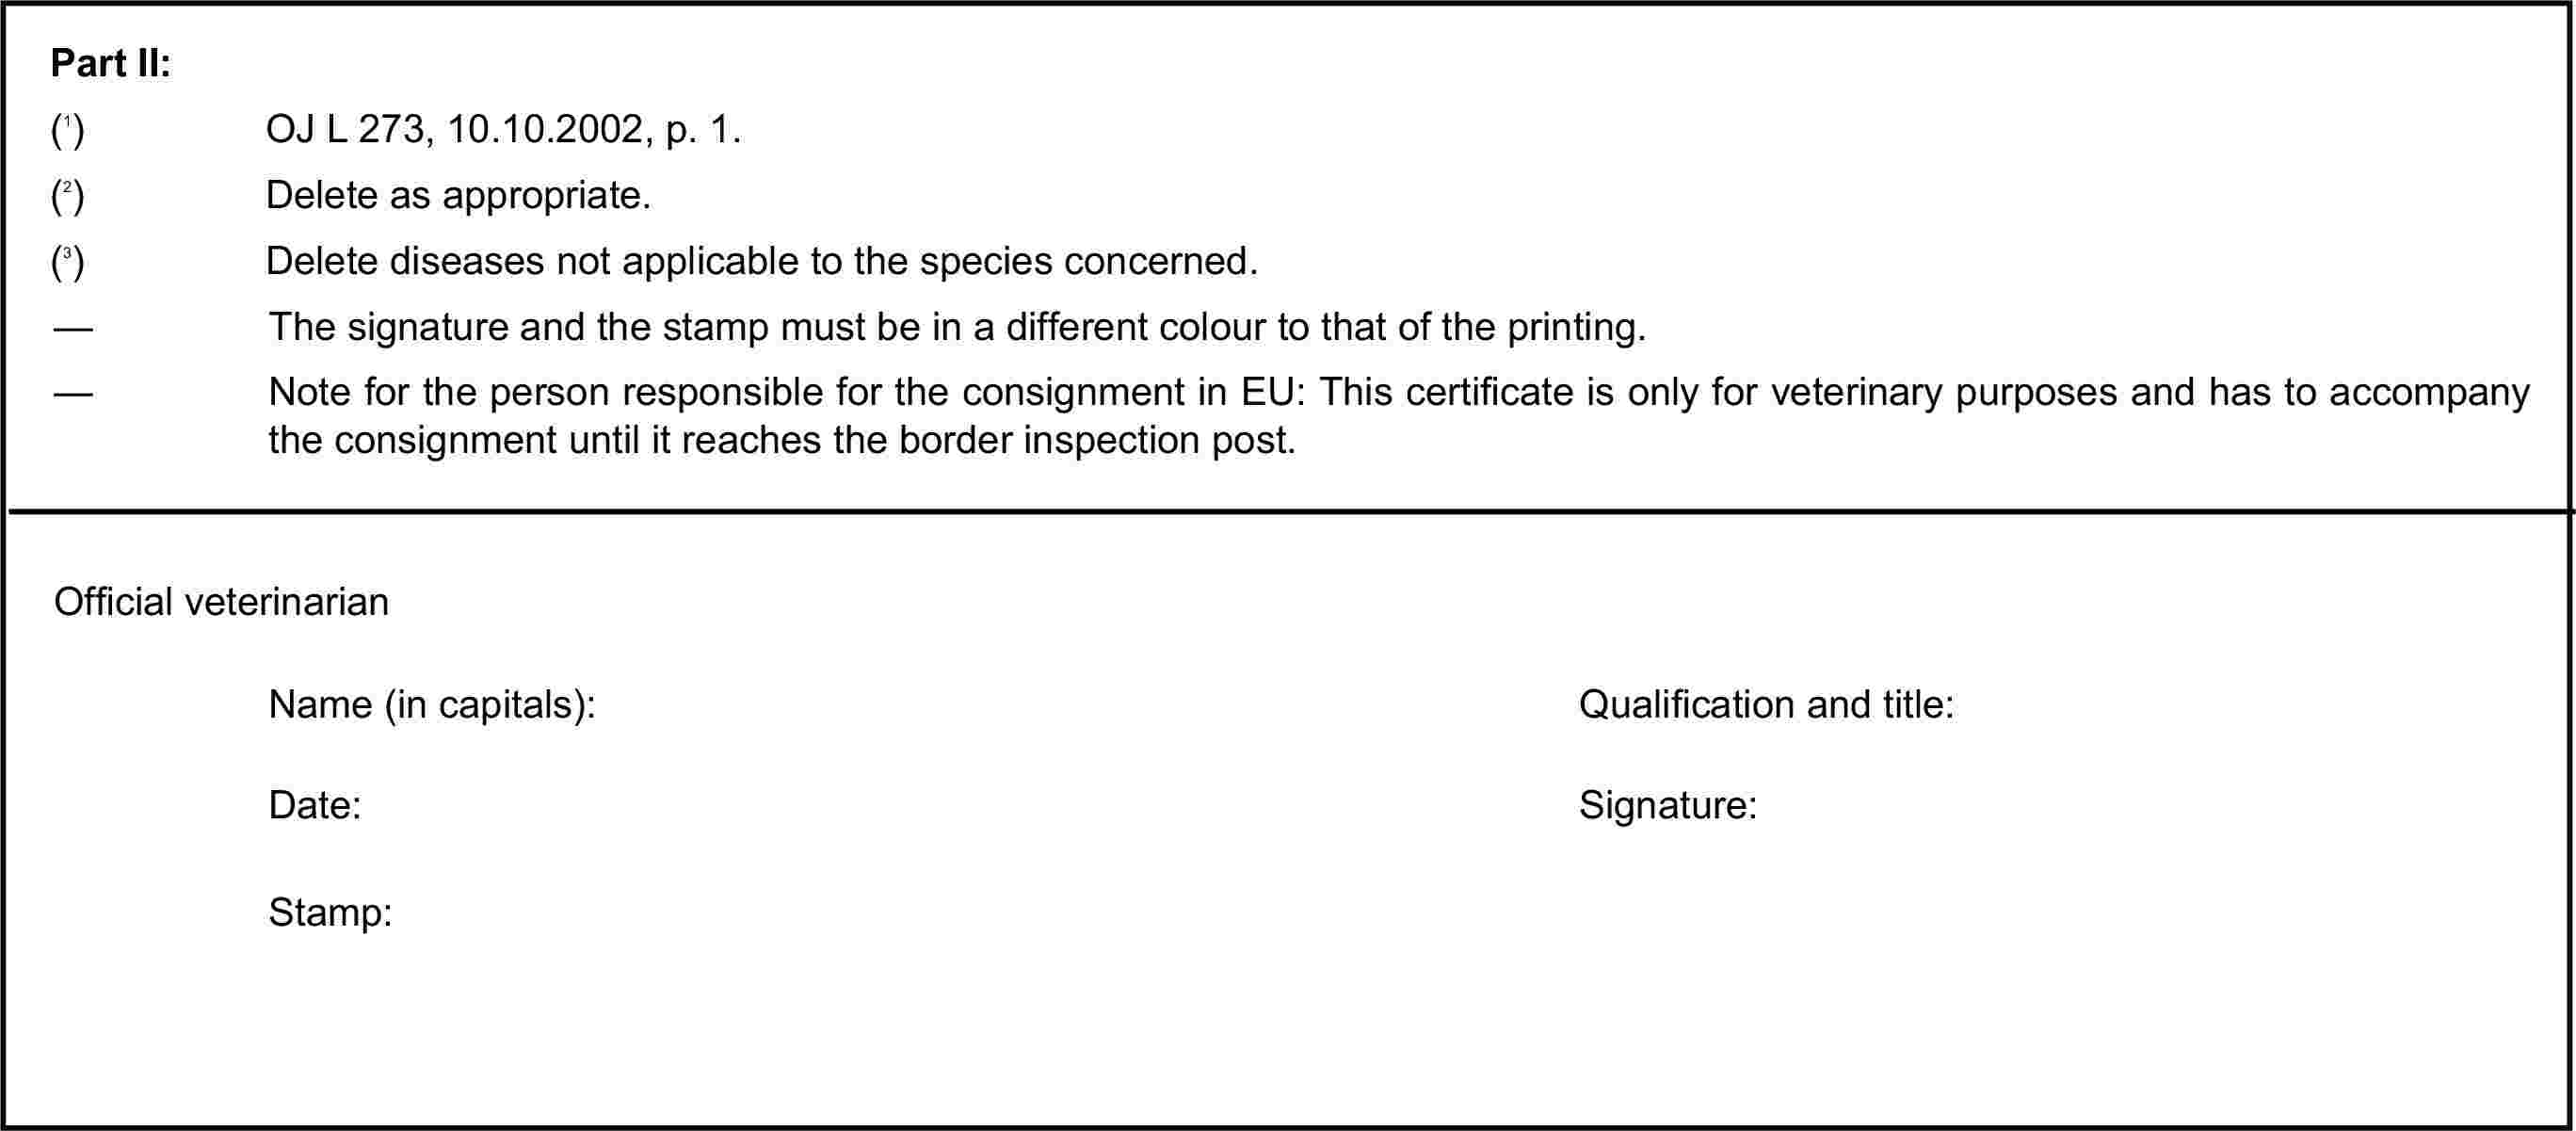 Part II:(1) OJ L 273, 10.10.2002, p. 1.(2) Delete as appropriate.(3) Delete diseases not applicable to the species concerned.— The signature and the stamp must be in a different colour to that of the printing.— Note for the person responsible for the consignment in EU: This certificate is only for veterinary purposes and has to accompany the consignment until it reaches the border inspection post.Official veterinarianName (in capitals):Qualification and title:Date:Signature:Stamp: